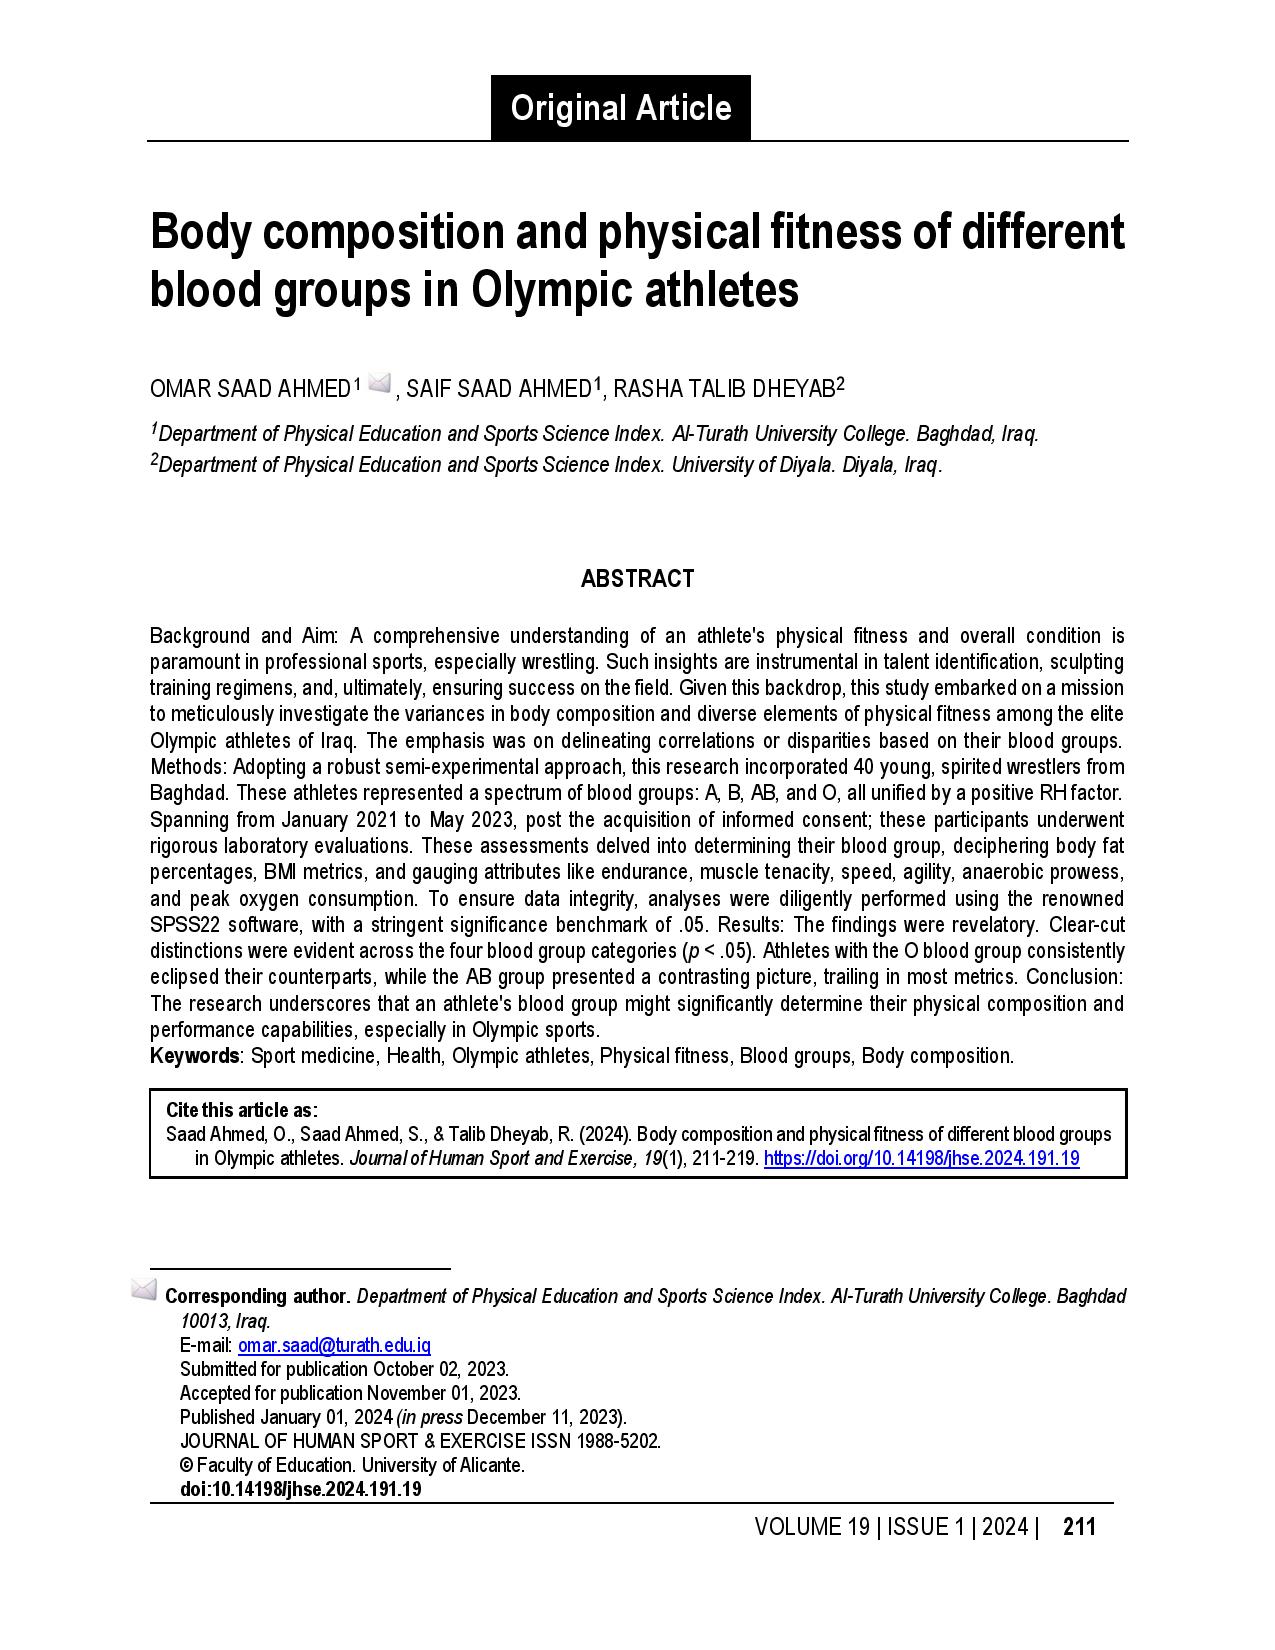 Body composition and physical fitness of different blood groups in Olympic athletes